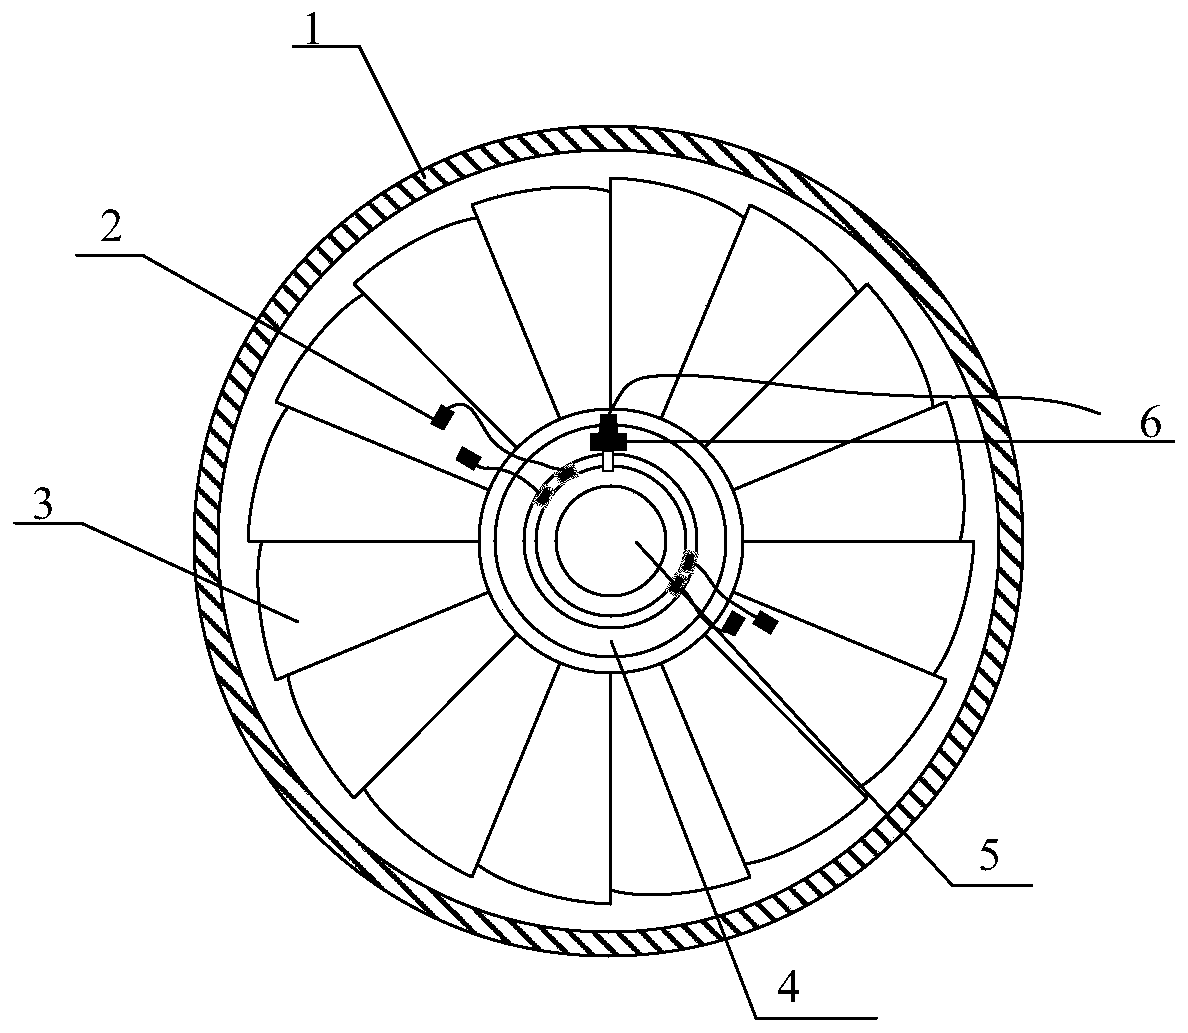 A rotating blade displacement field inversion reconstruction method and system